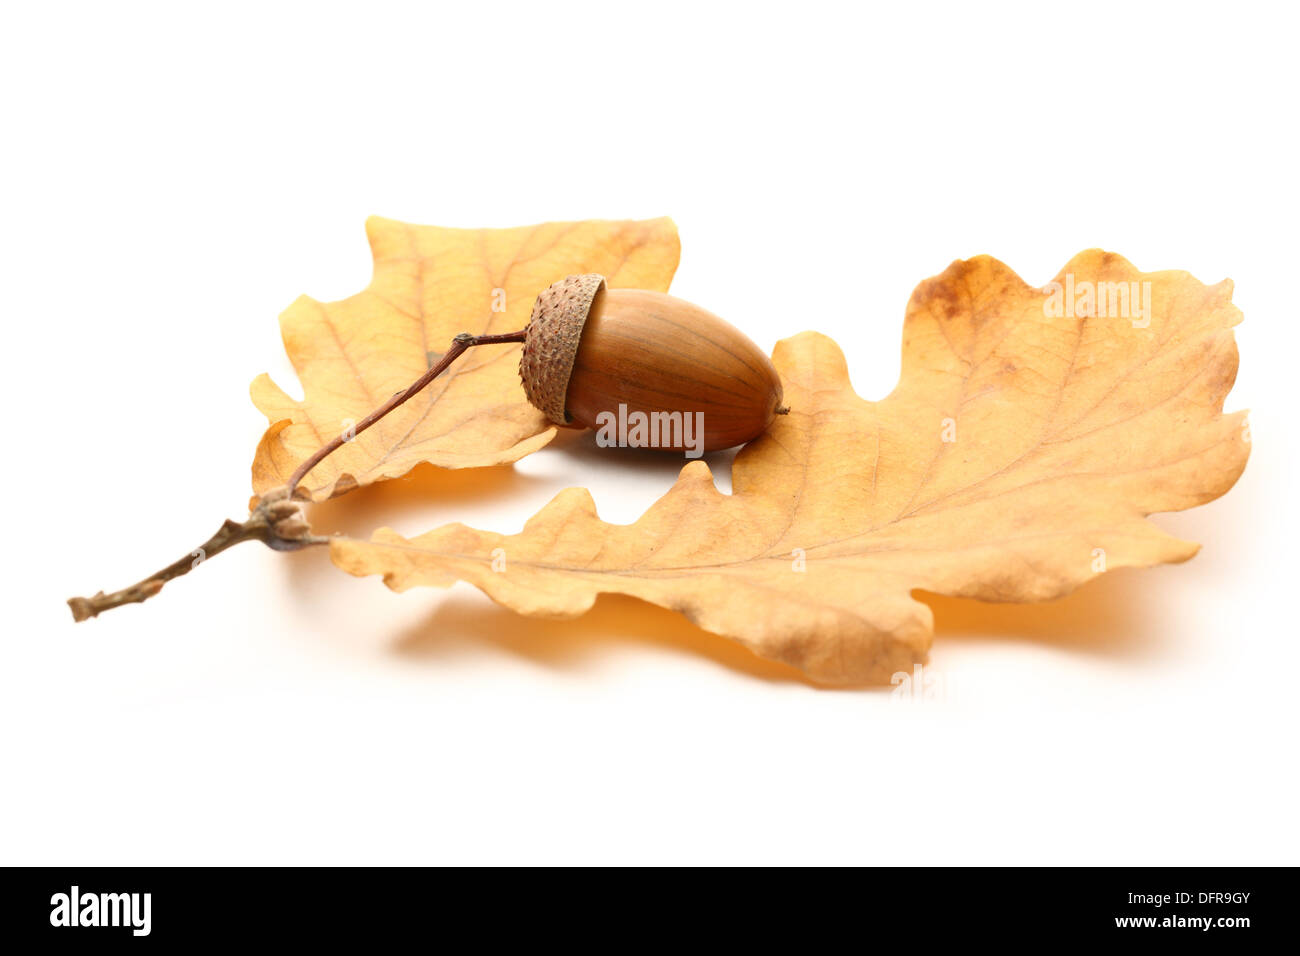 Fresh acorn with dried leaves Stock Photo